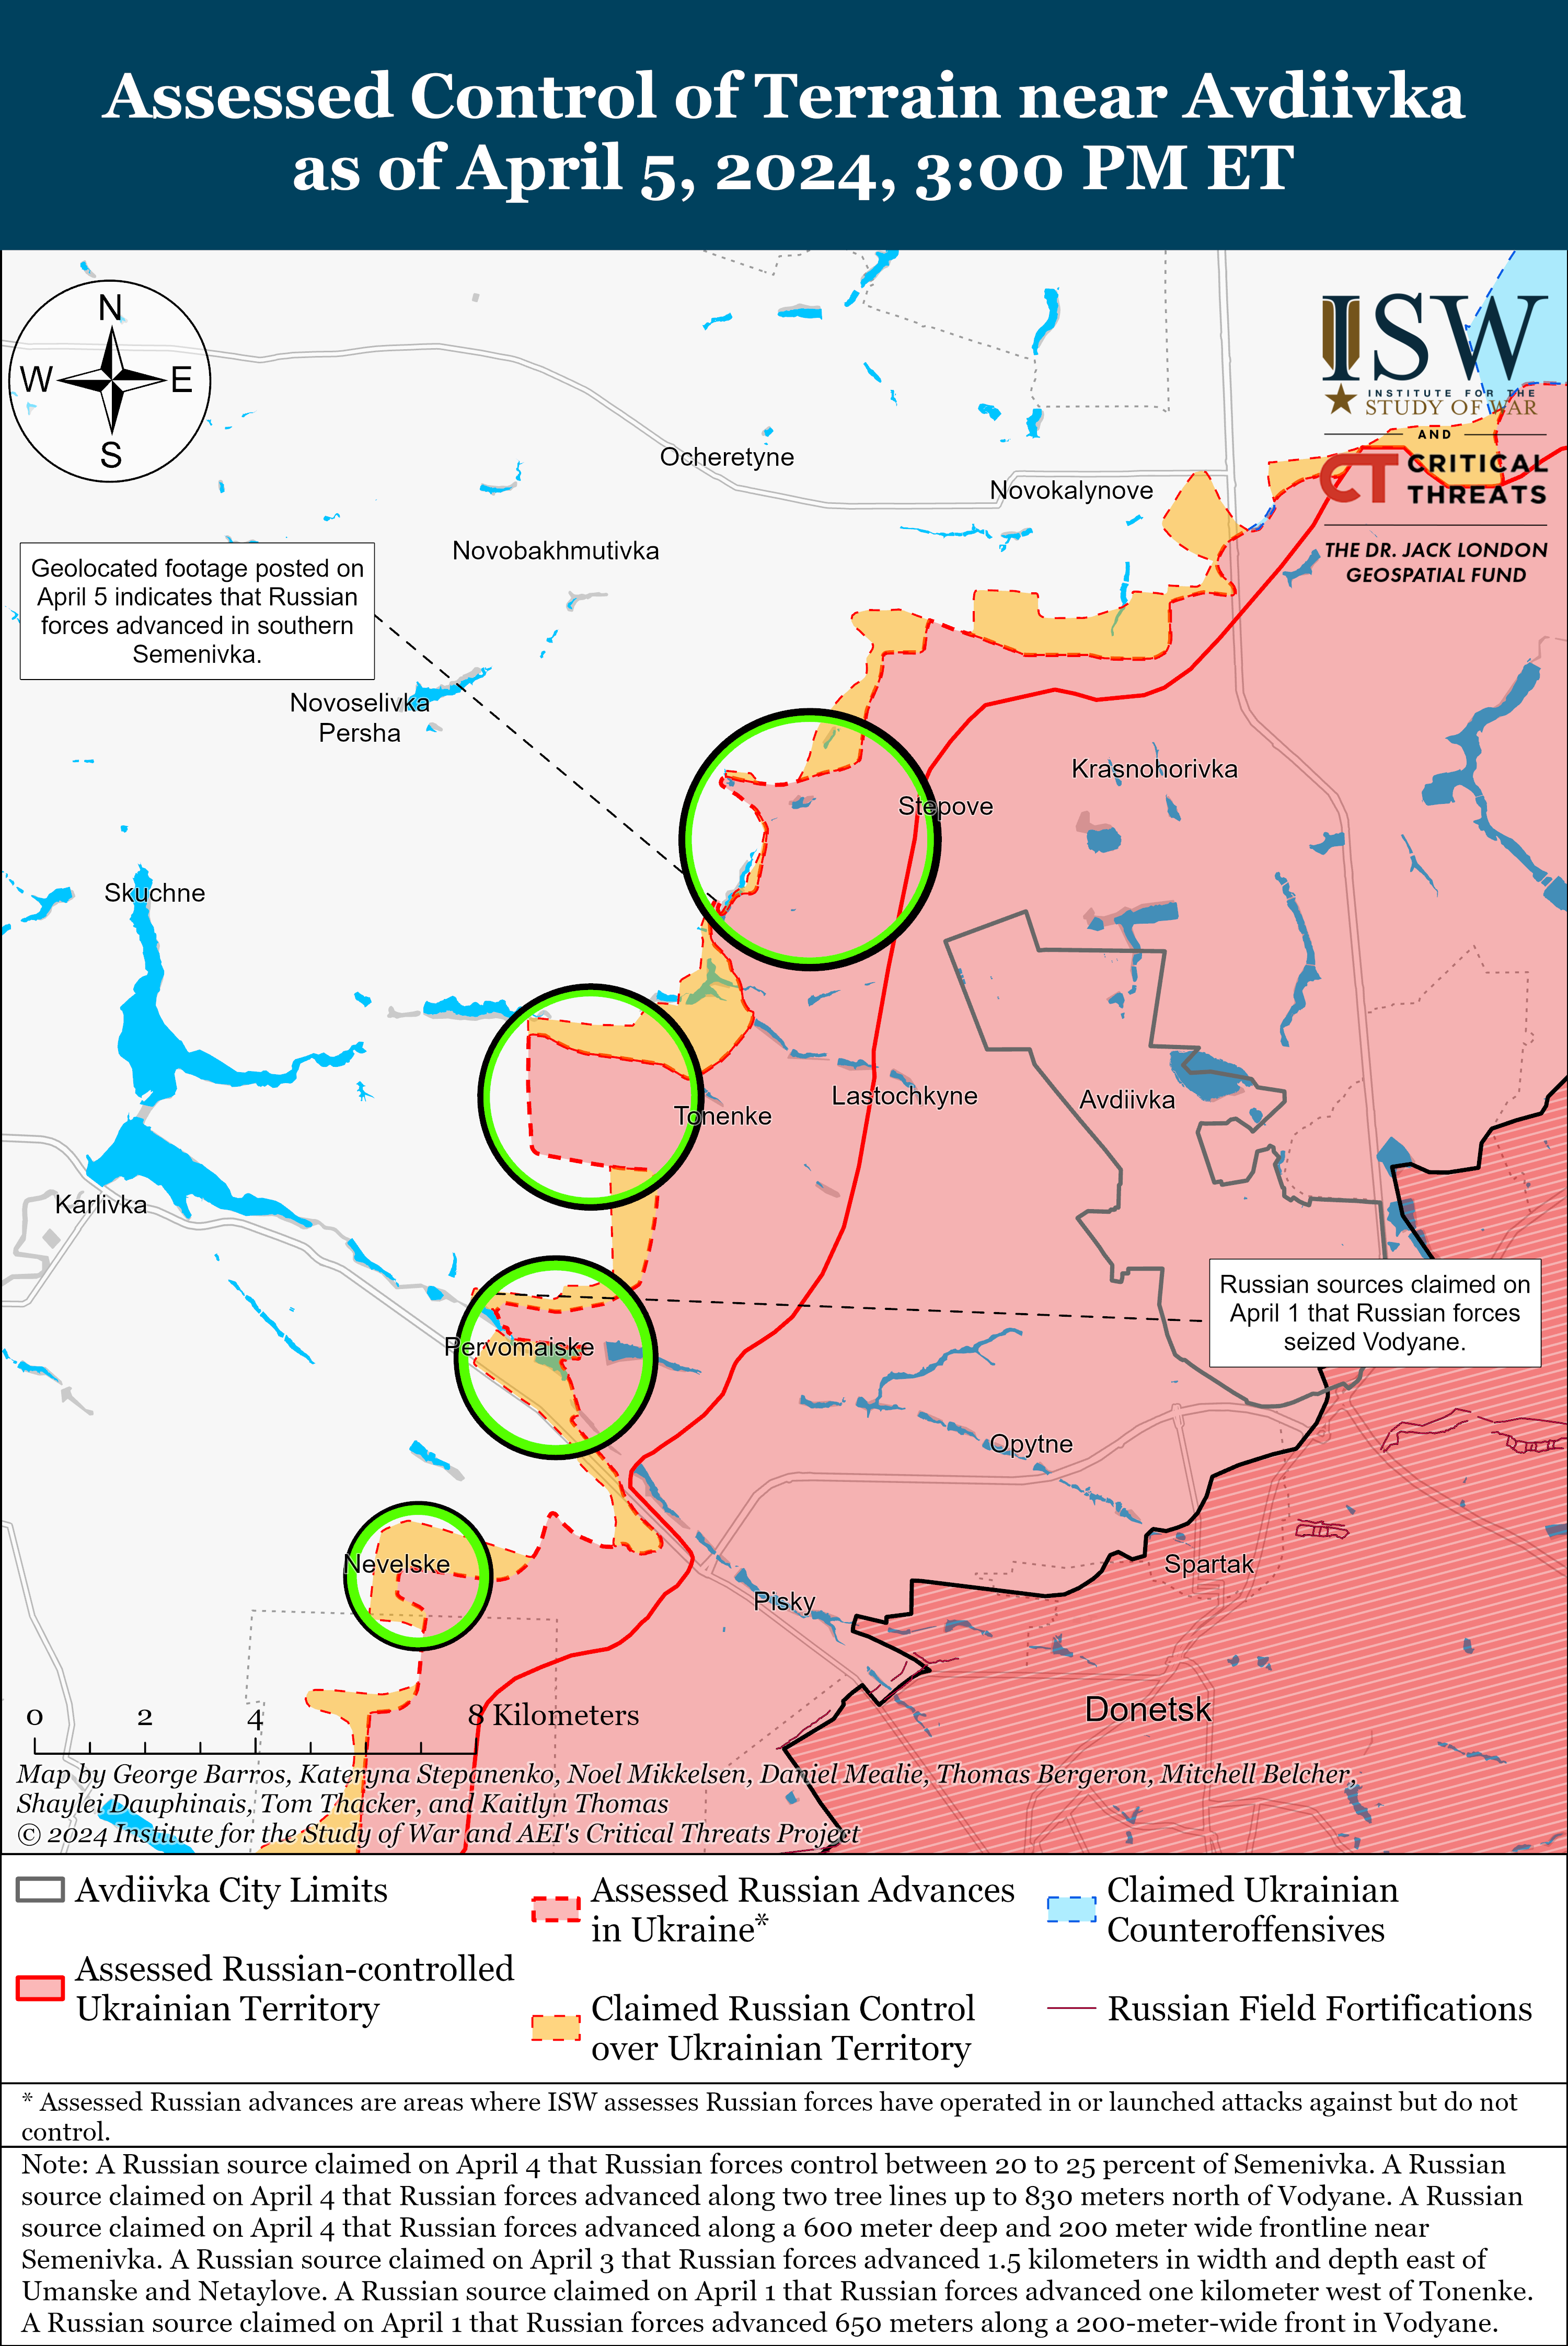 West_of_Avdiivka_Battle_Map_Draft_April_5_2024.png